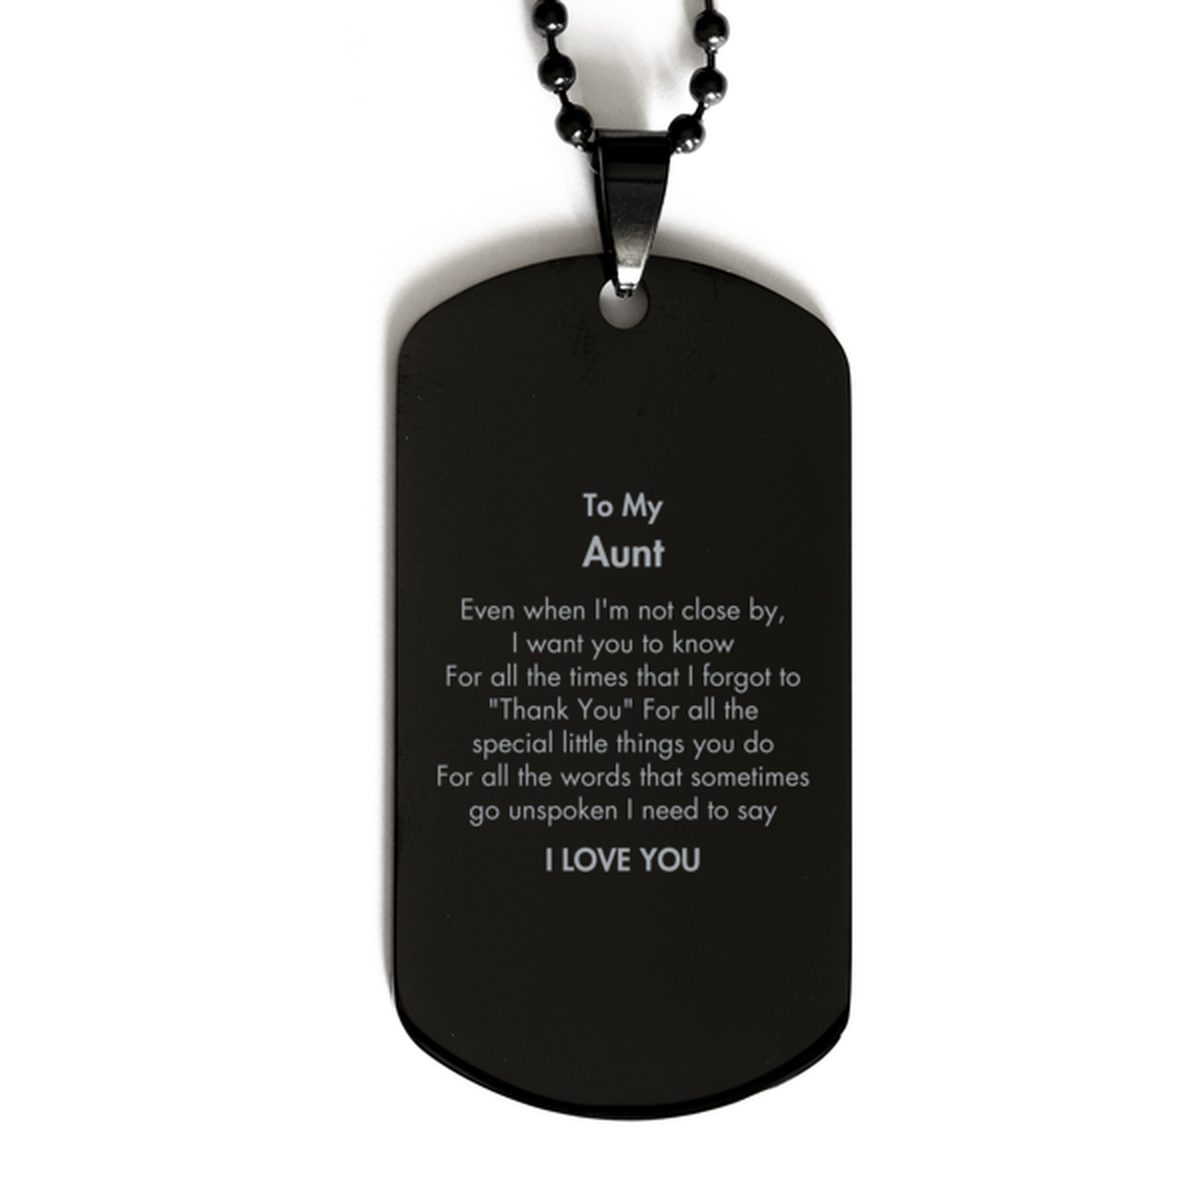 Thank You Gifts for Aunt, Keepsake Black Dog Tag Gifts for Aunt Birthday Mother's day Father's Day Aunt For all the words That sometimes go unspoken I need to say I LOVE YOU